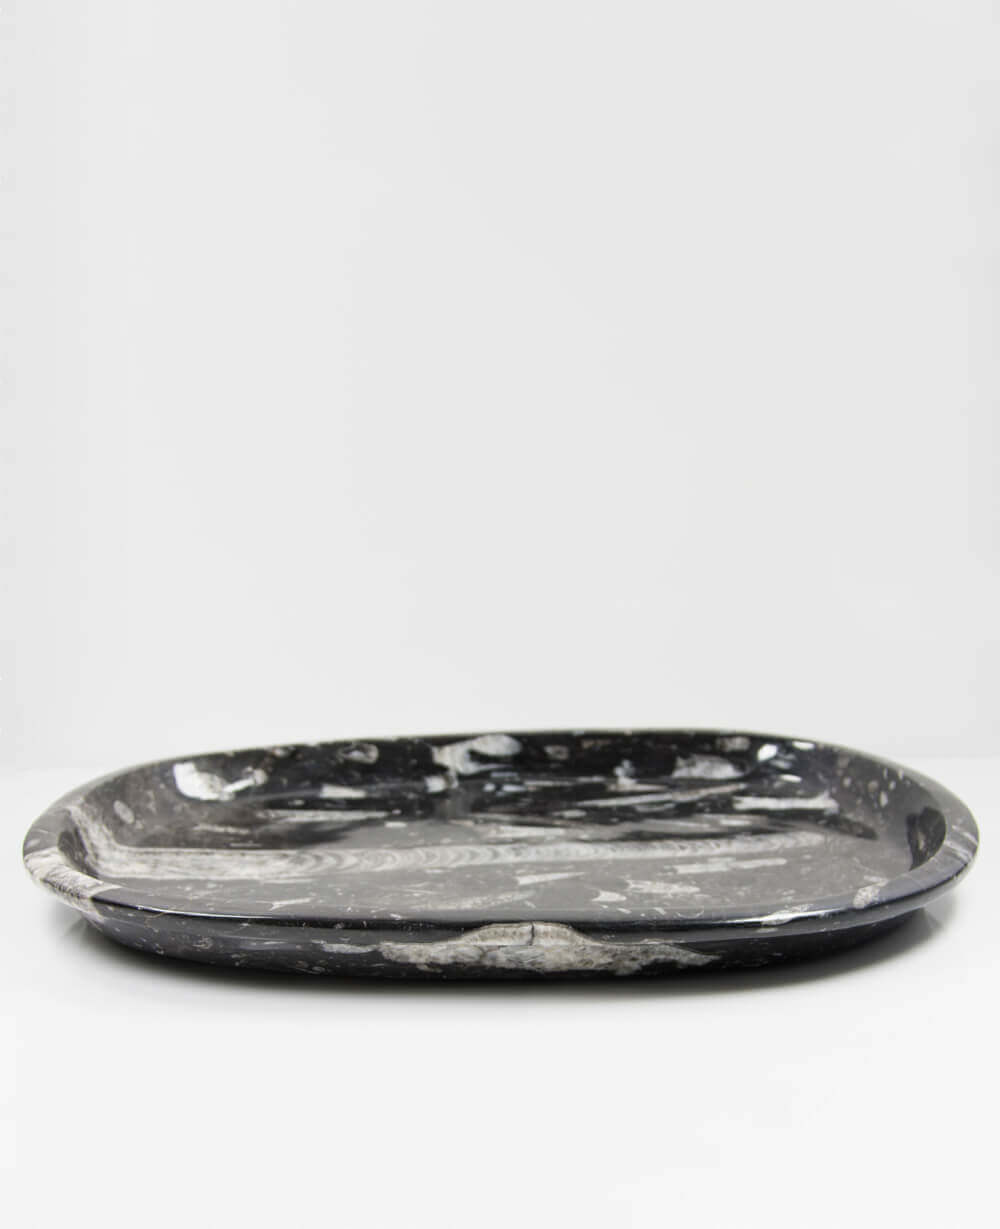 A stunning hand-crafted Devonian marble fossil and quartz mineral bowl for sale for luxury dining measuring 559mm